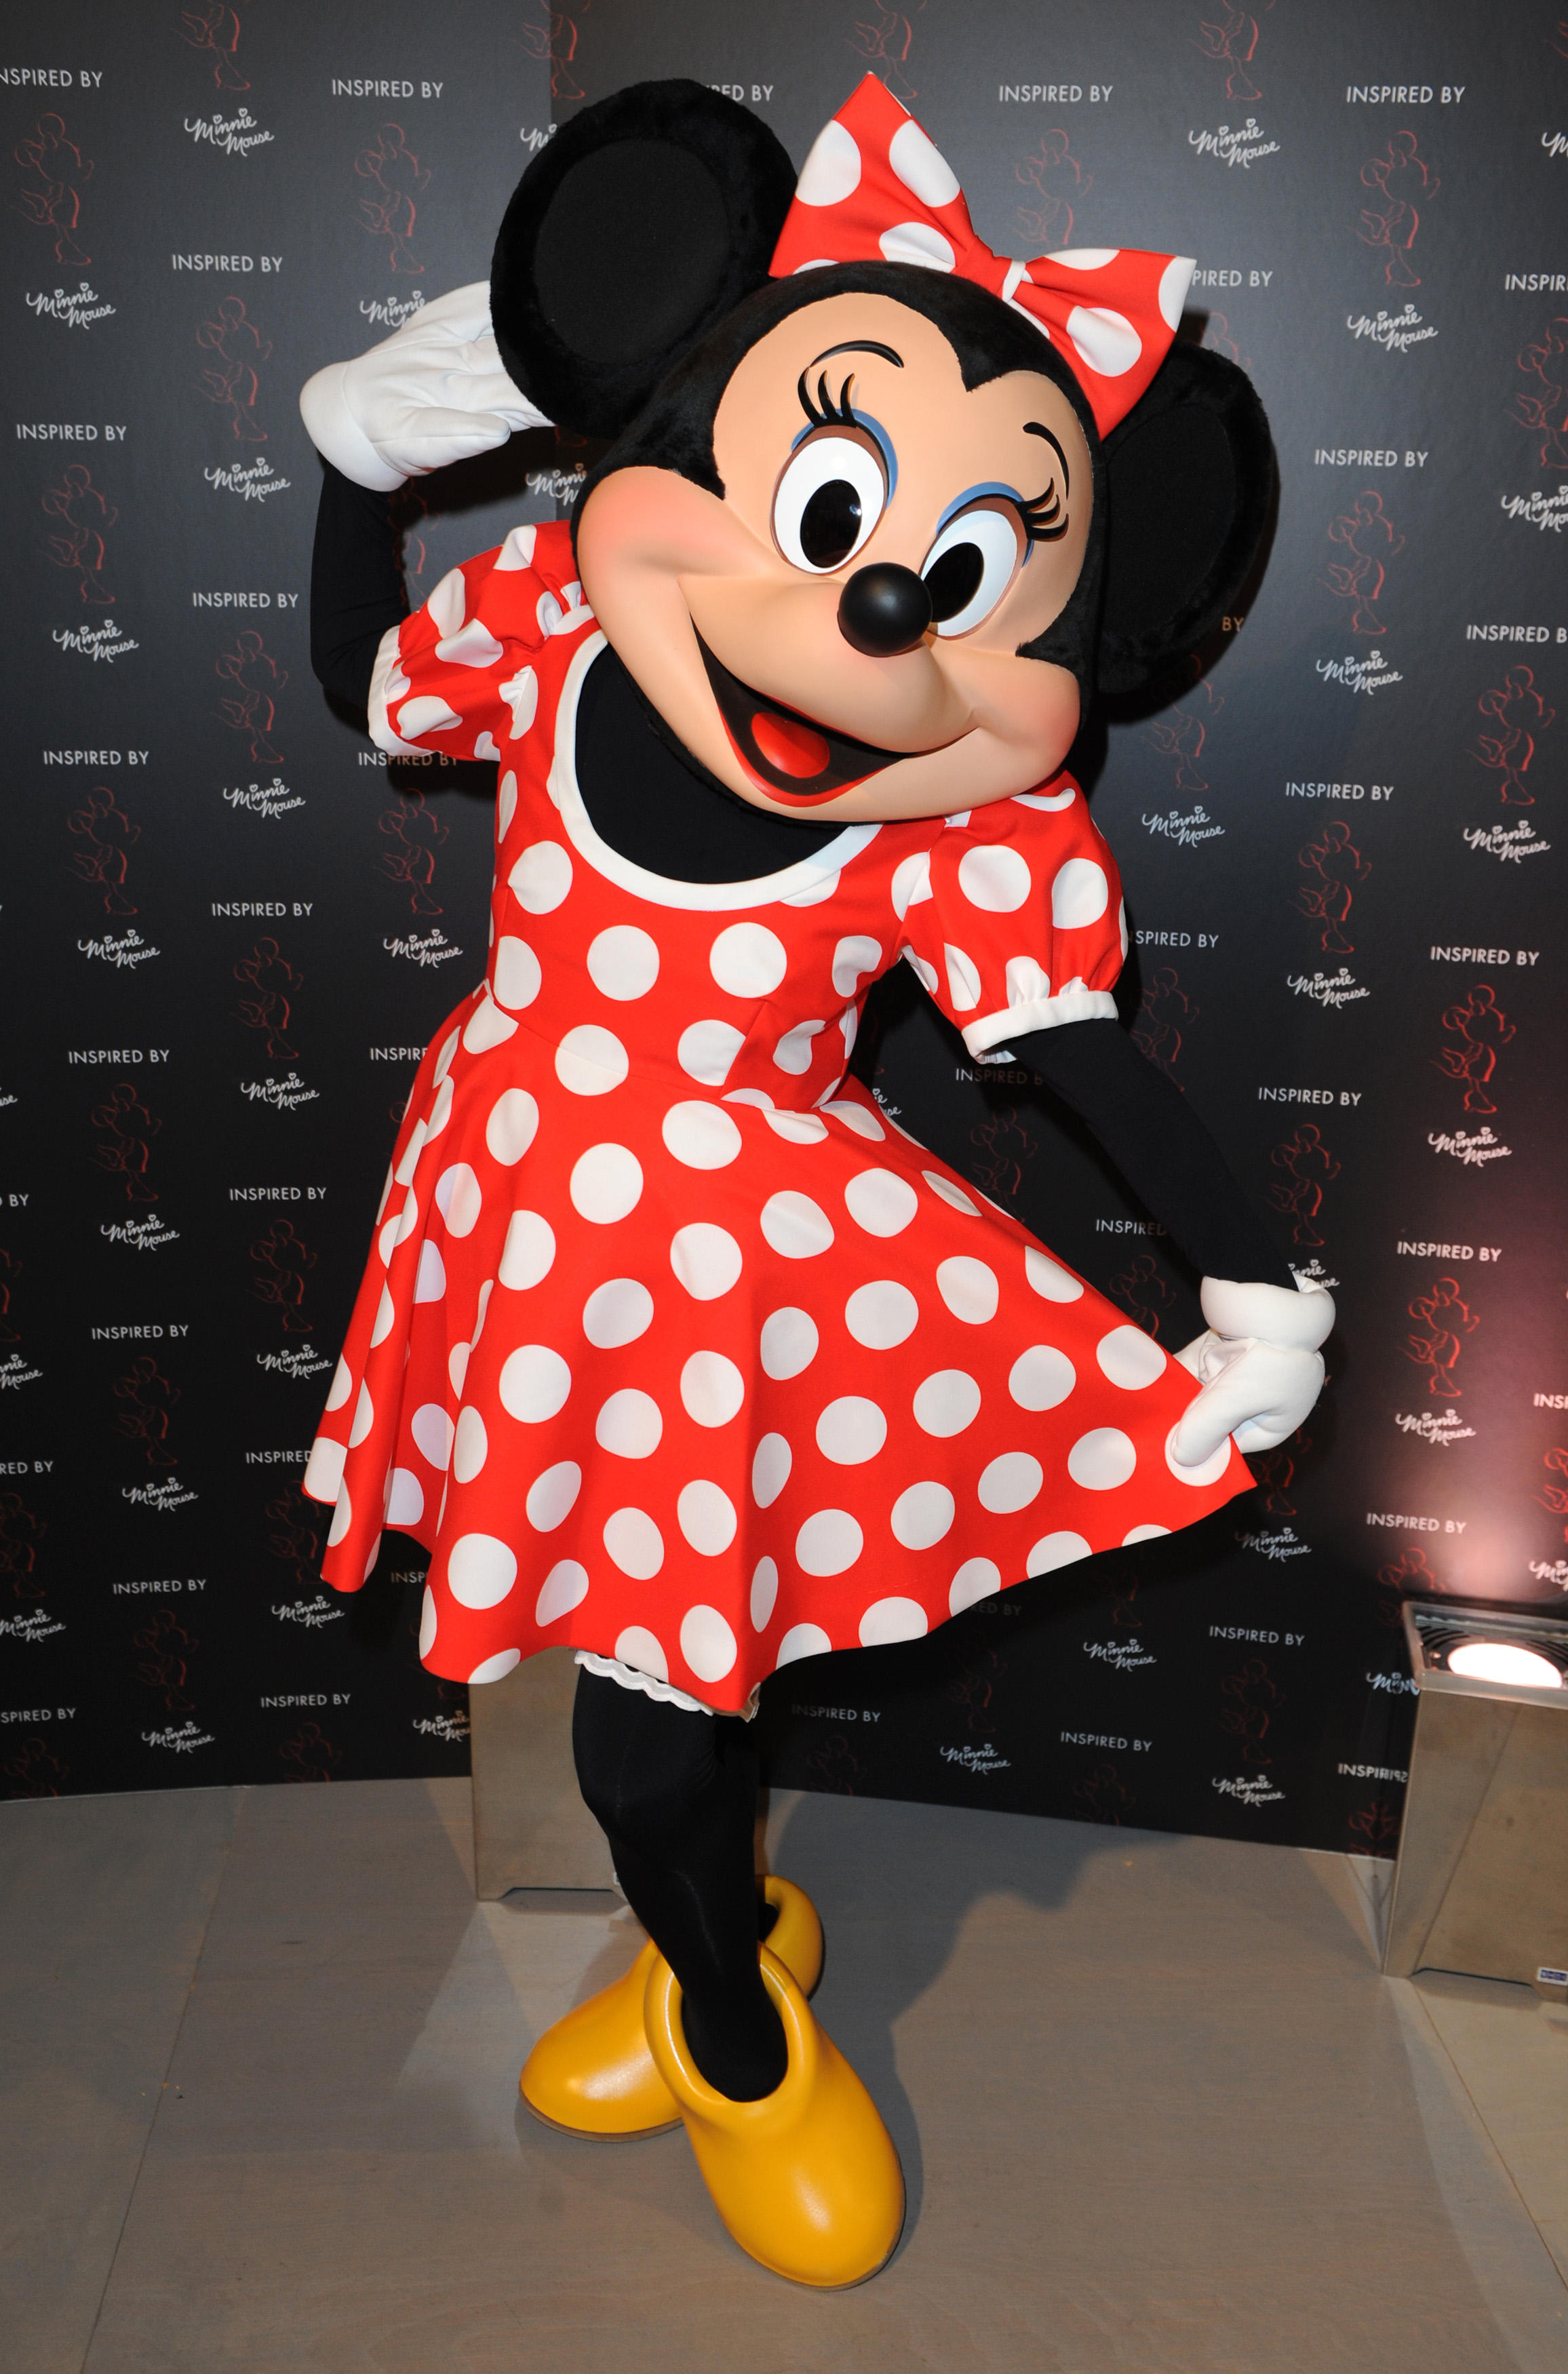 Workers at Disney, California, were reportedly filmed twerking in Minnie Mouse outfits last year